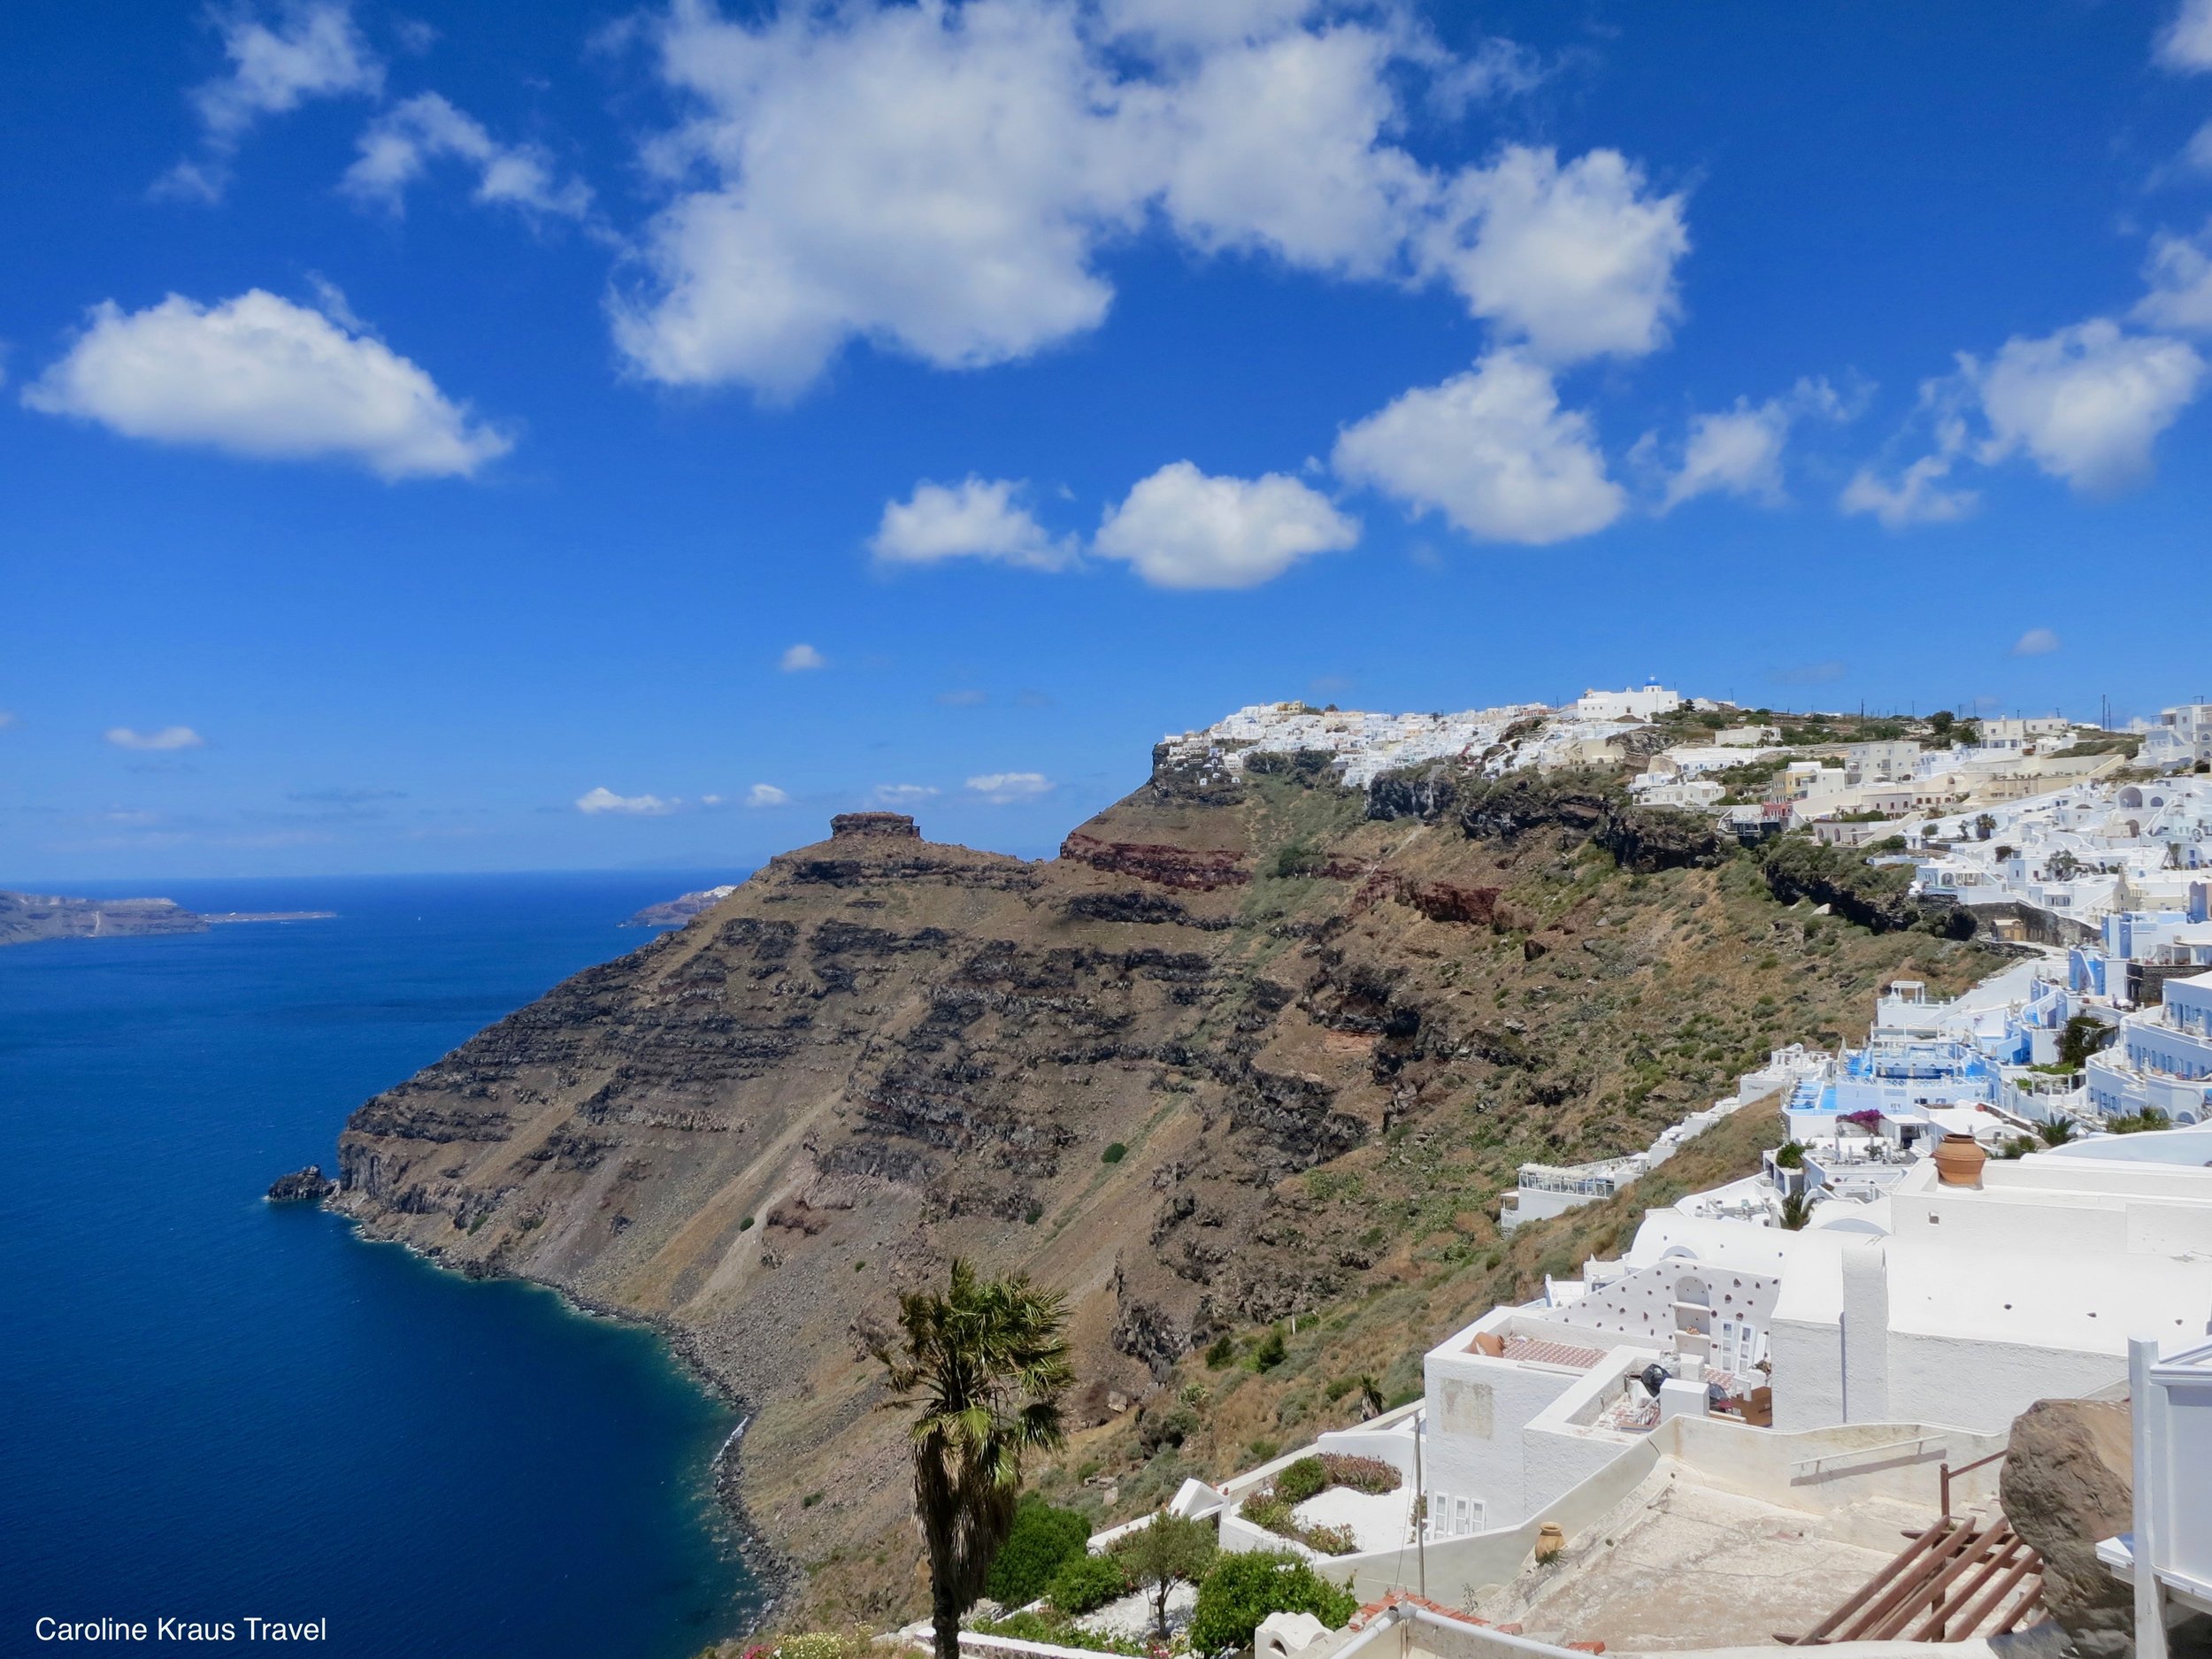 Which famous Santorini activity involves watching the sunset from the village of Oia?